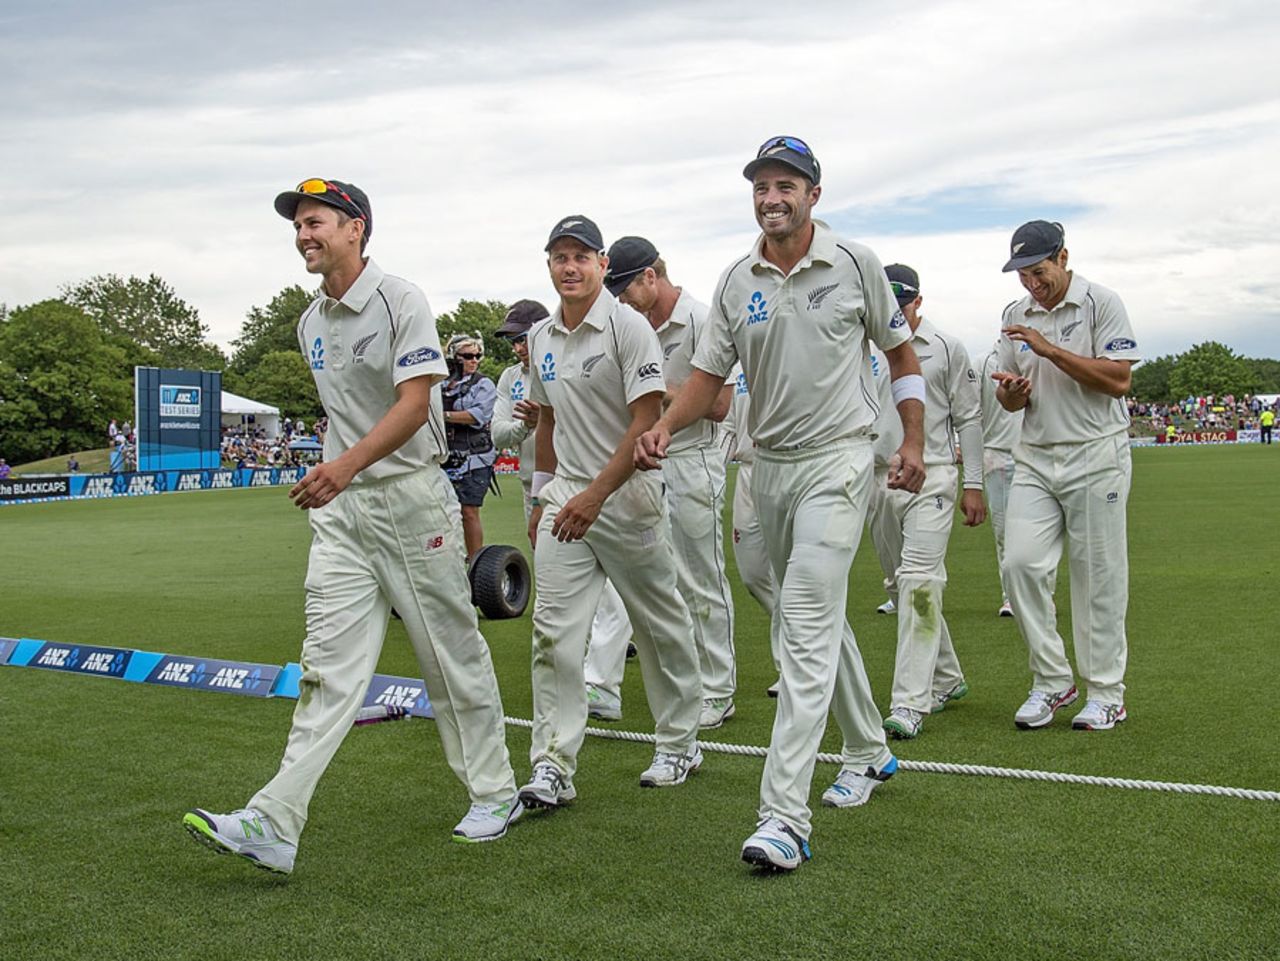 Trent Boult and Tim Southee lead the team off the field, New Zealand v Sri Lanka, 1st Test, Christchurch, 2nd day, December 27, 2014